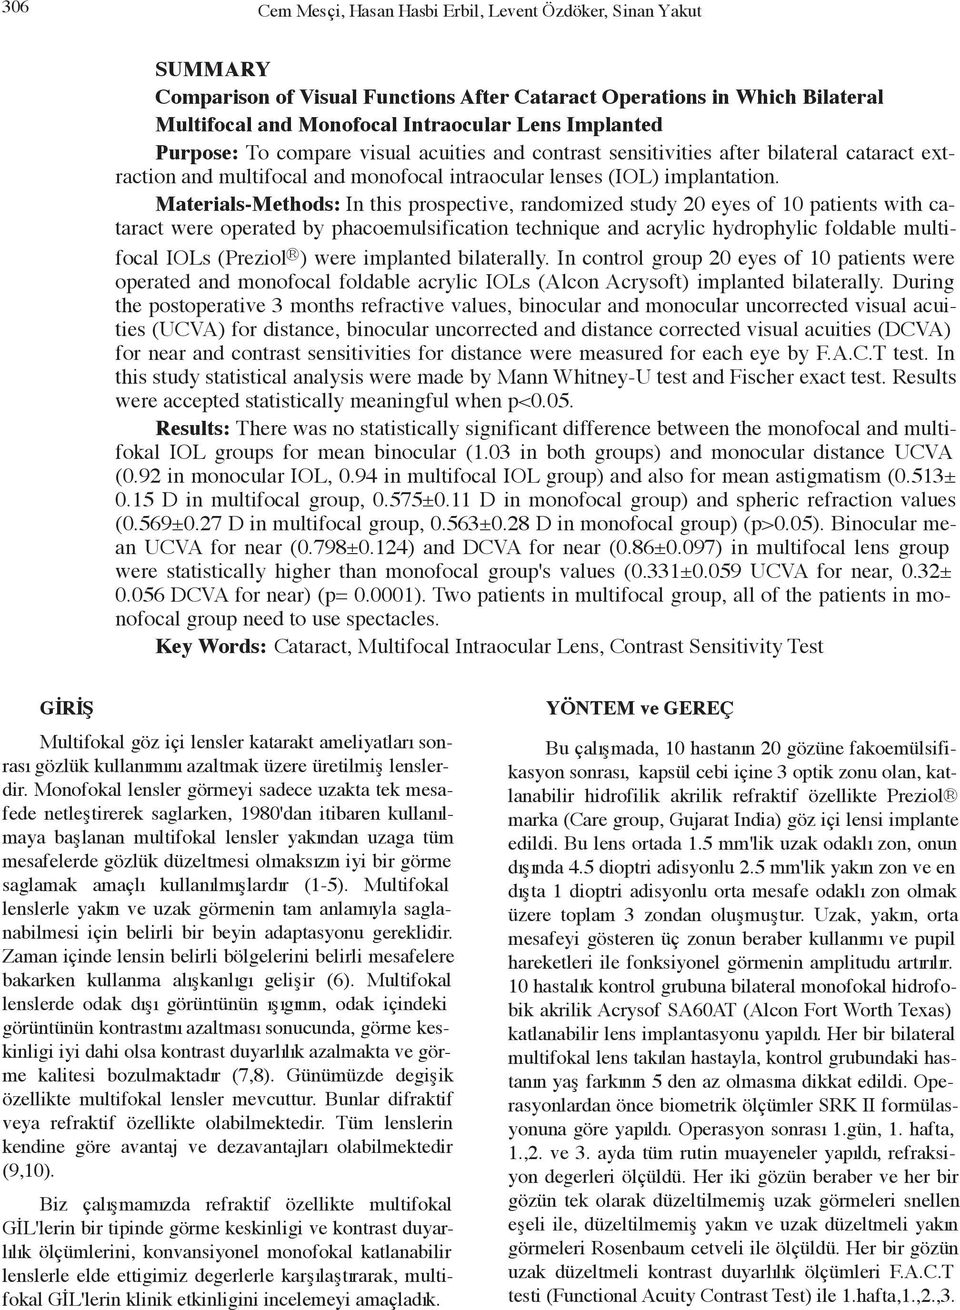 Materials-Methods: In this rosective, randomized study 20 eyes of 10 atients with cataract were oerated by hacoemulsification technique and acrylic hydrohylic foldable multifocal IOLs (Preziol ) were